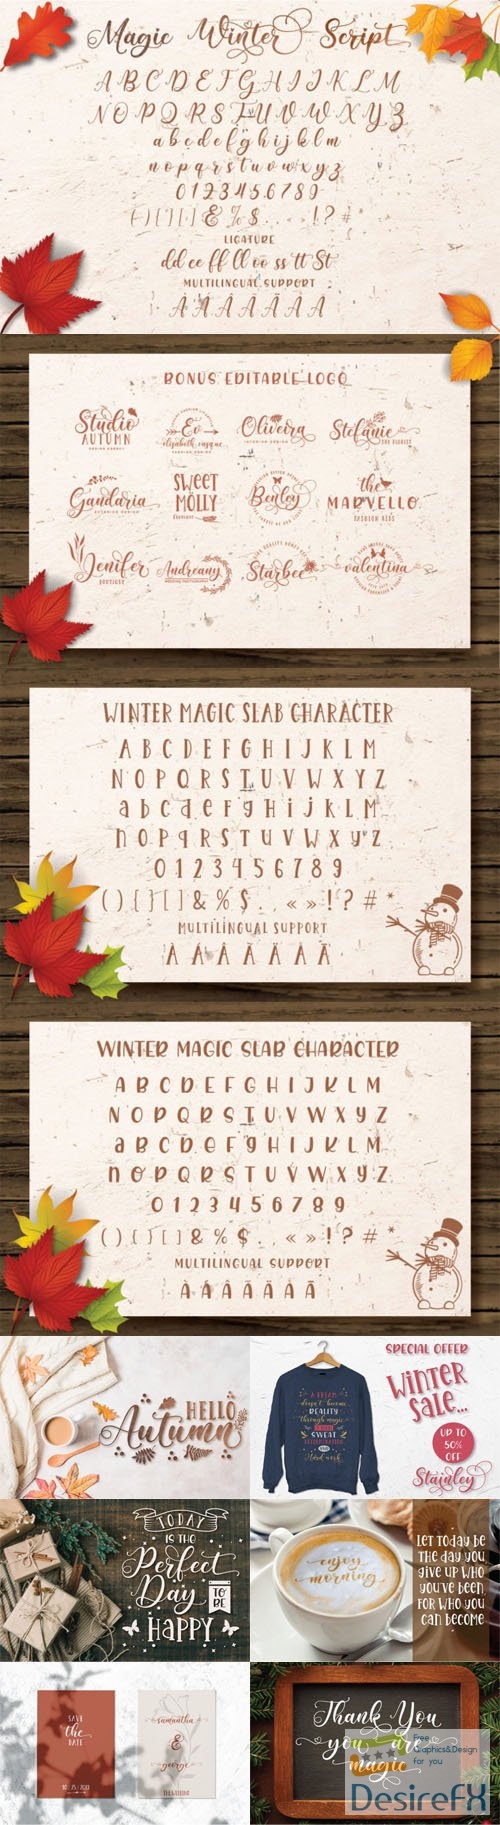 Magic Winter - Lovely Font Trio + Extras